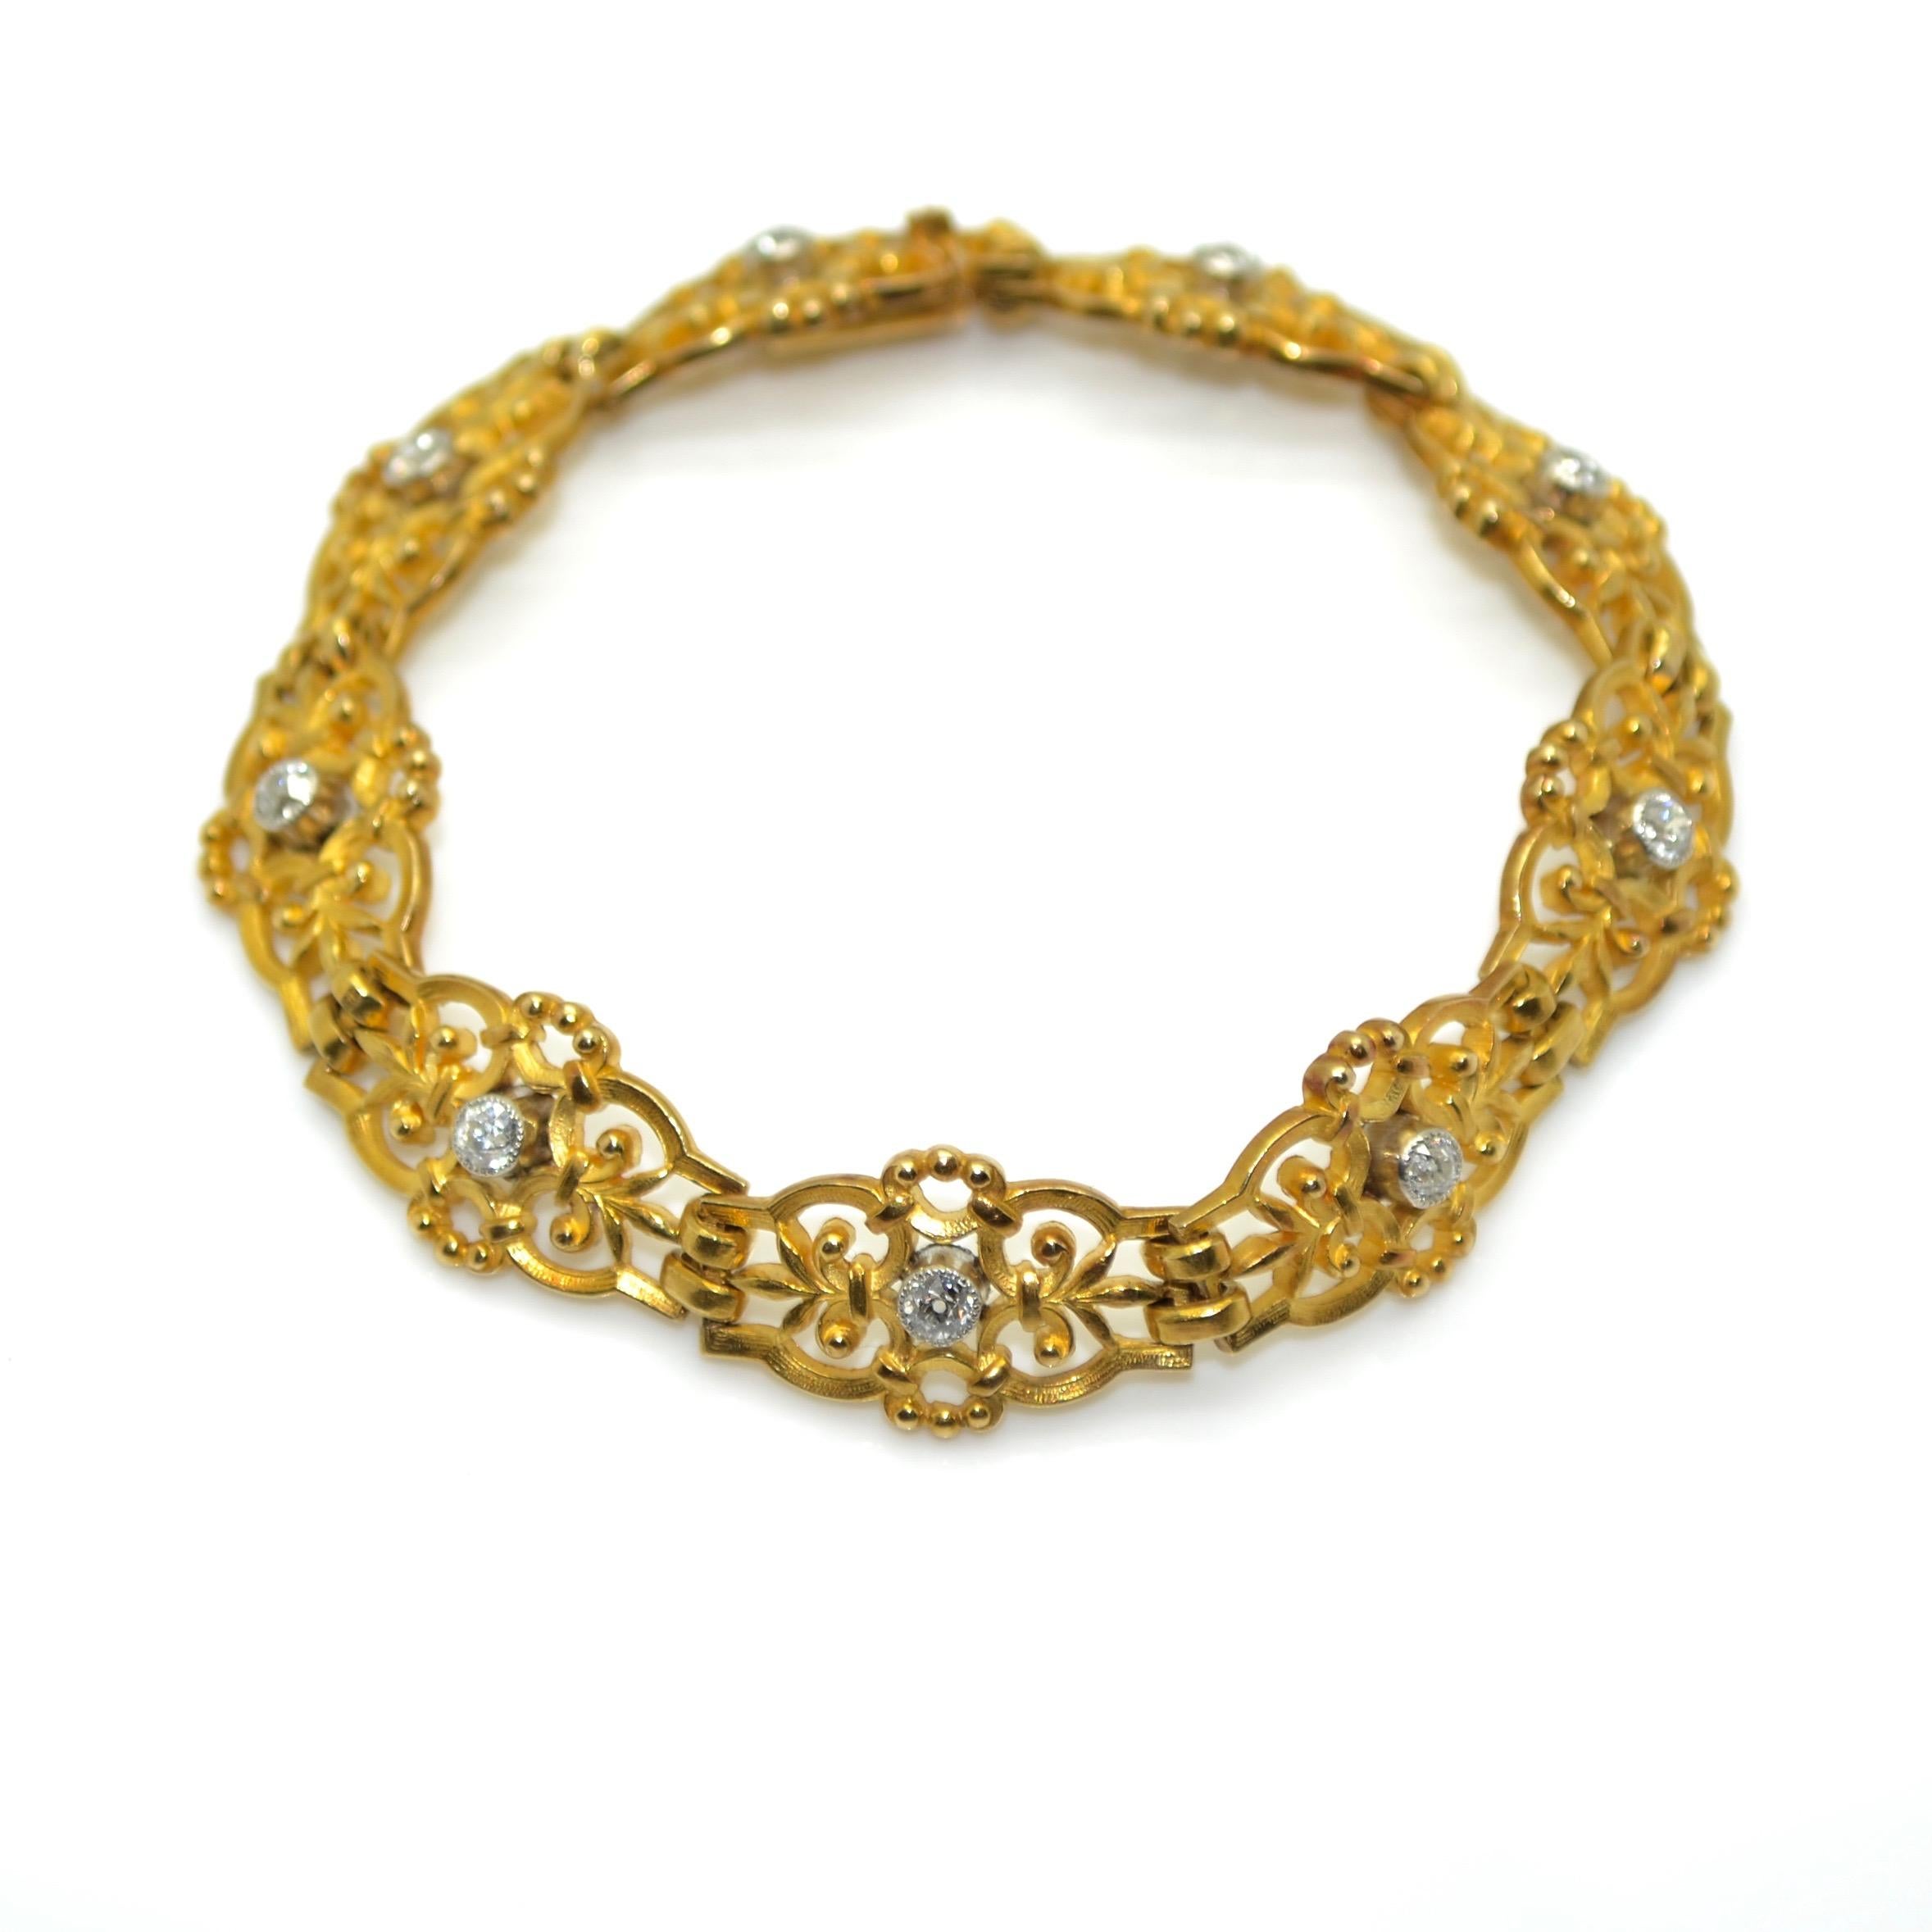 French Antique Gold and diaonds Bracelet, circa 1850
The bracelet is made of nine 18k yellow gold links set with Old European cut diamonds (estimated total weight 0.75 carats G-H color and SI clarity). 
This elegant bracelet is weighting 29.30g and